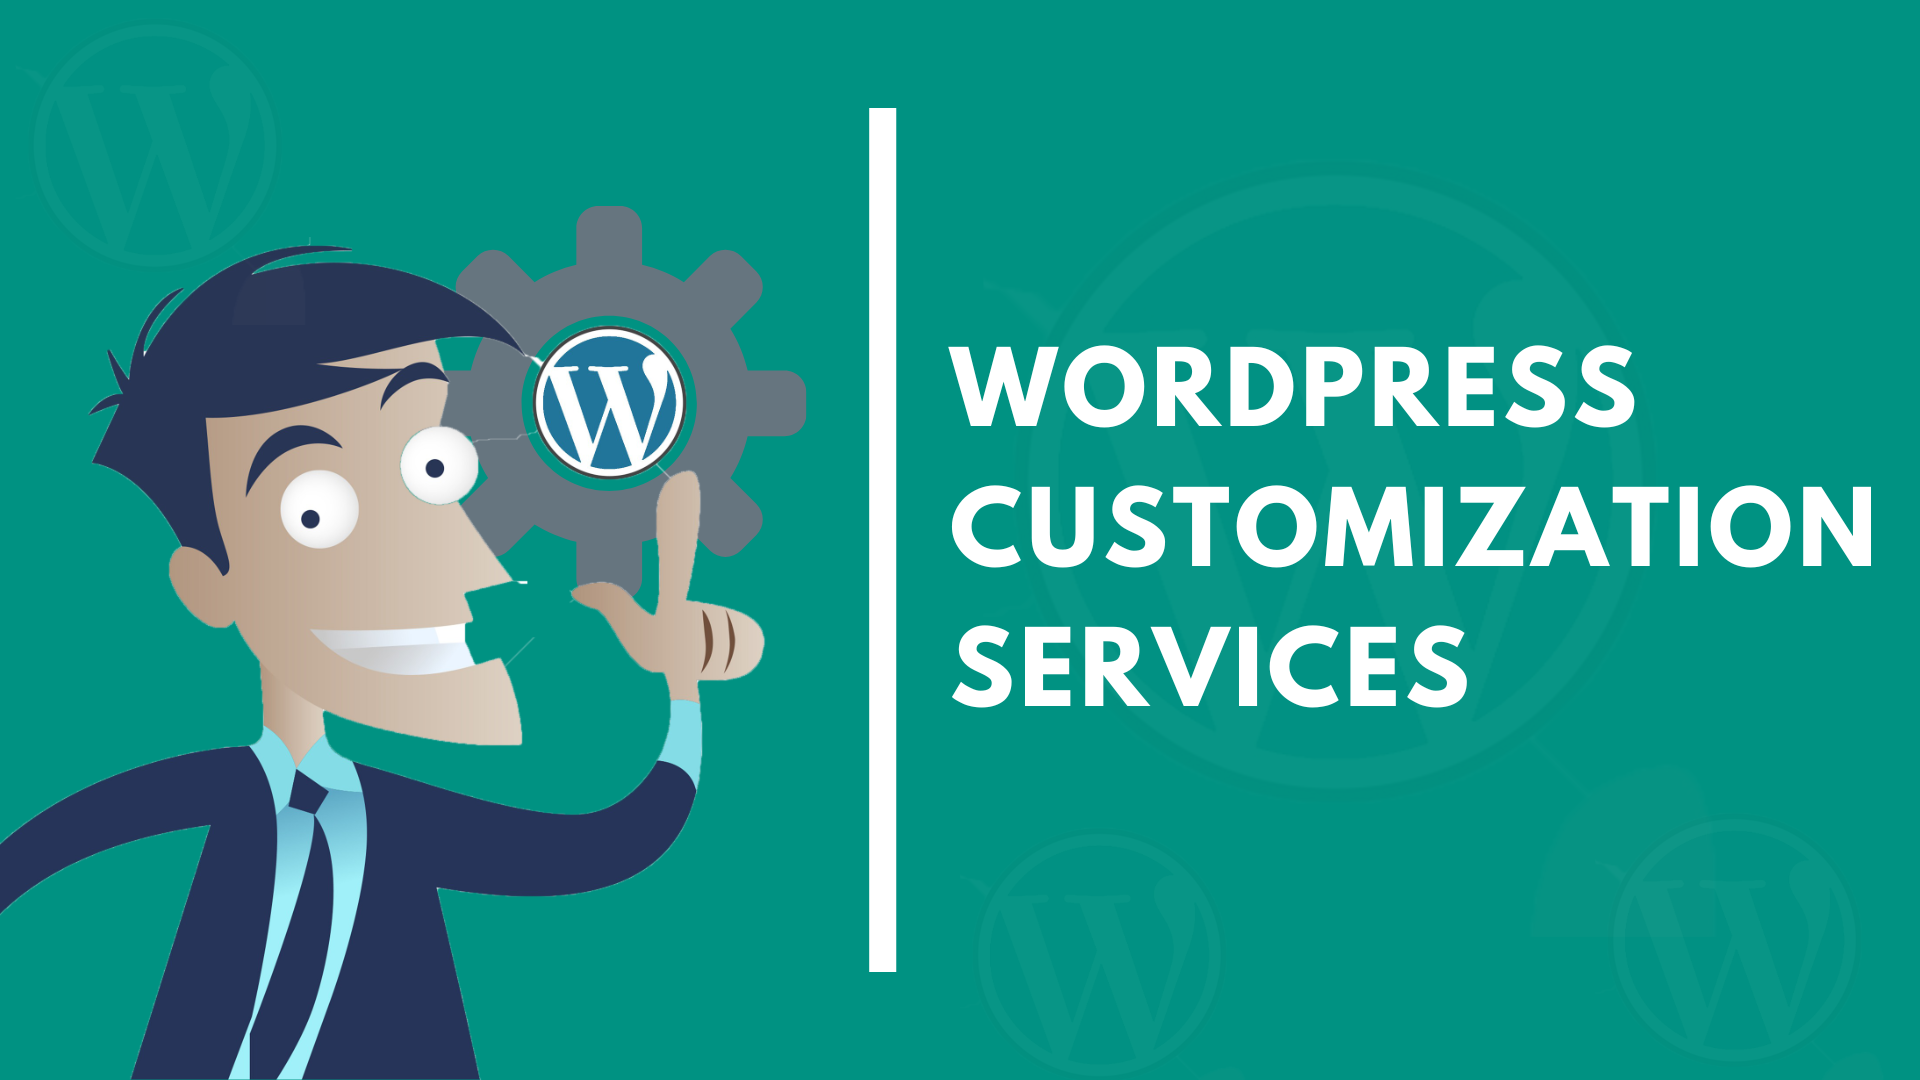 Are you looking for WordPress Customization Services?